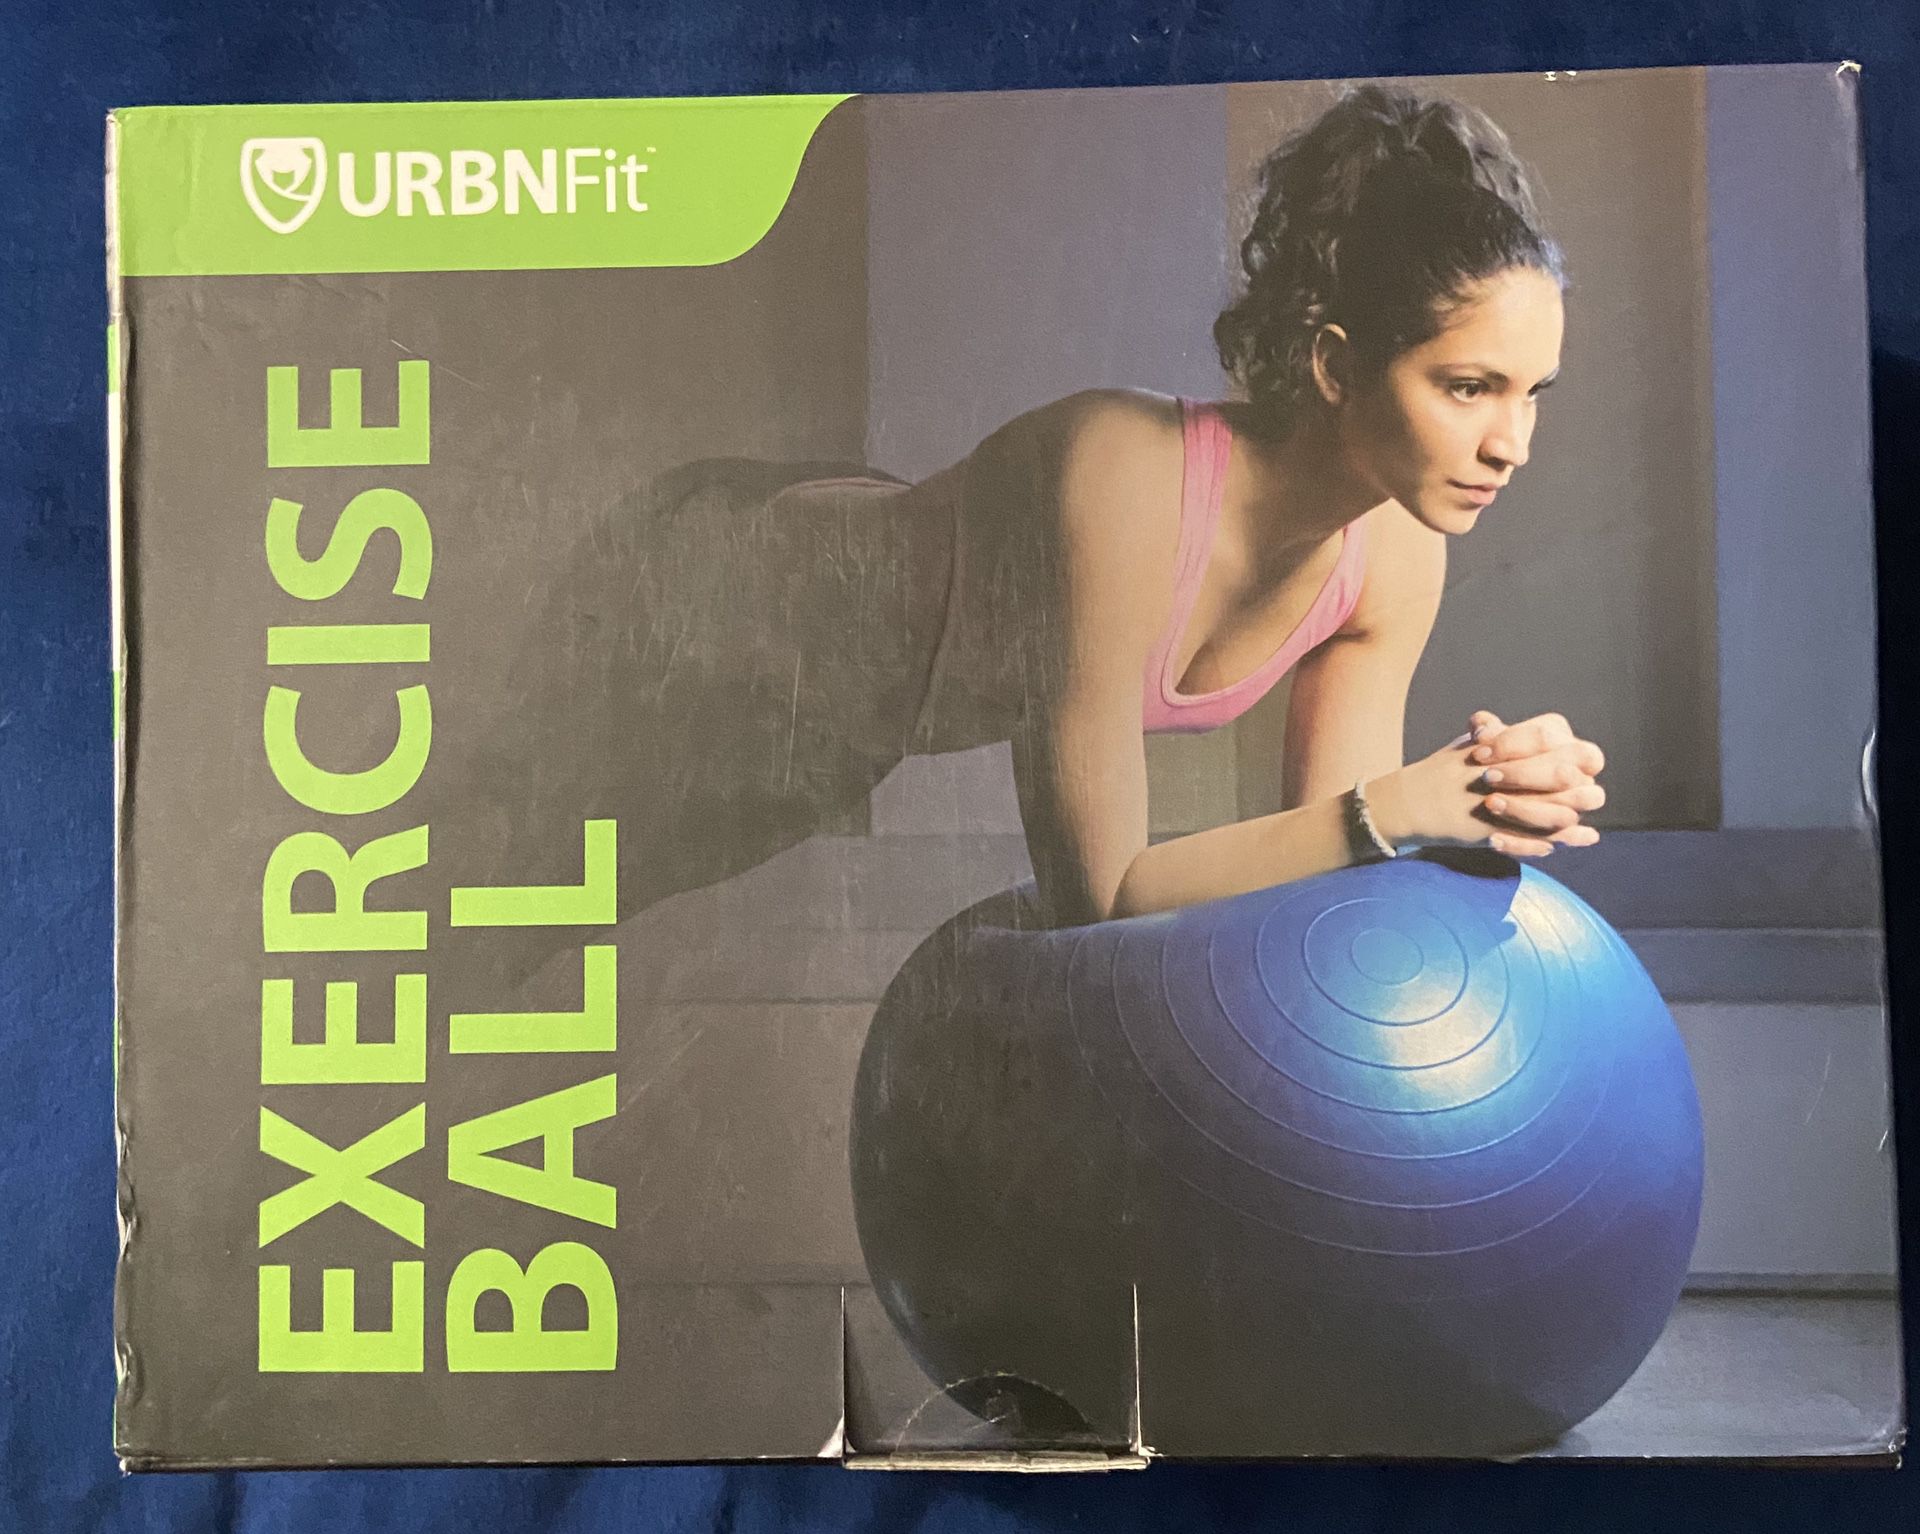 URBNFit Exercise Ball for Fitness - Workout Guide & Quick Pump Included